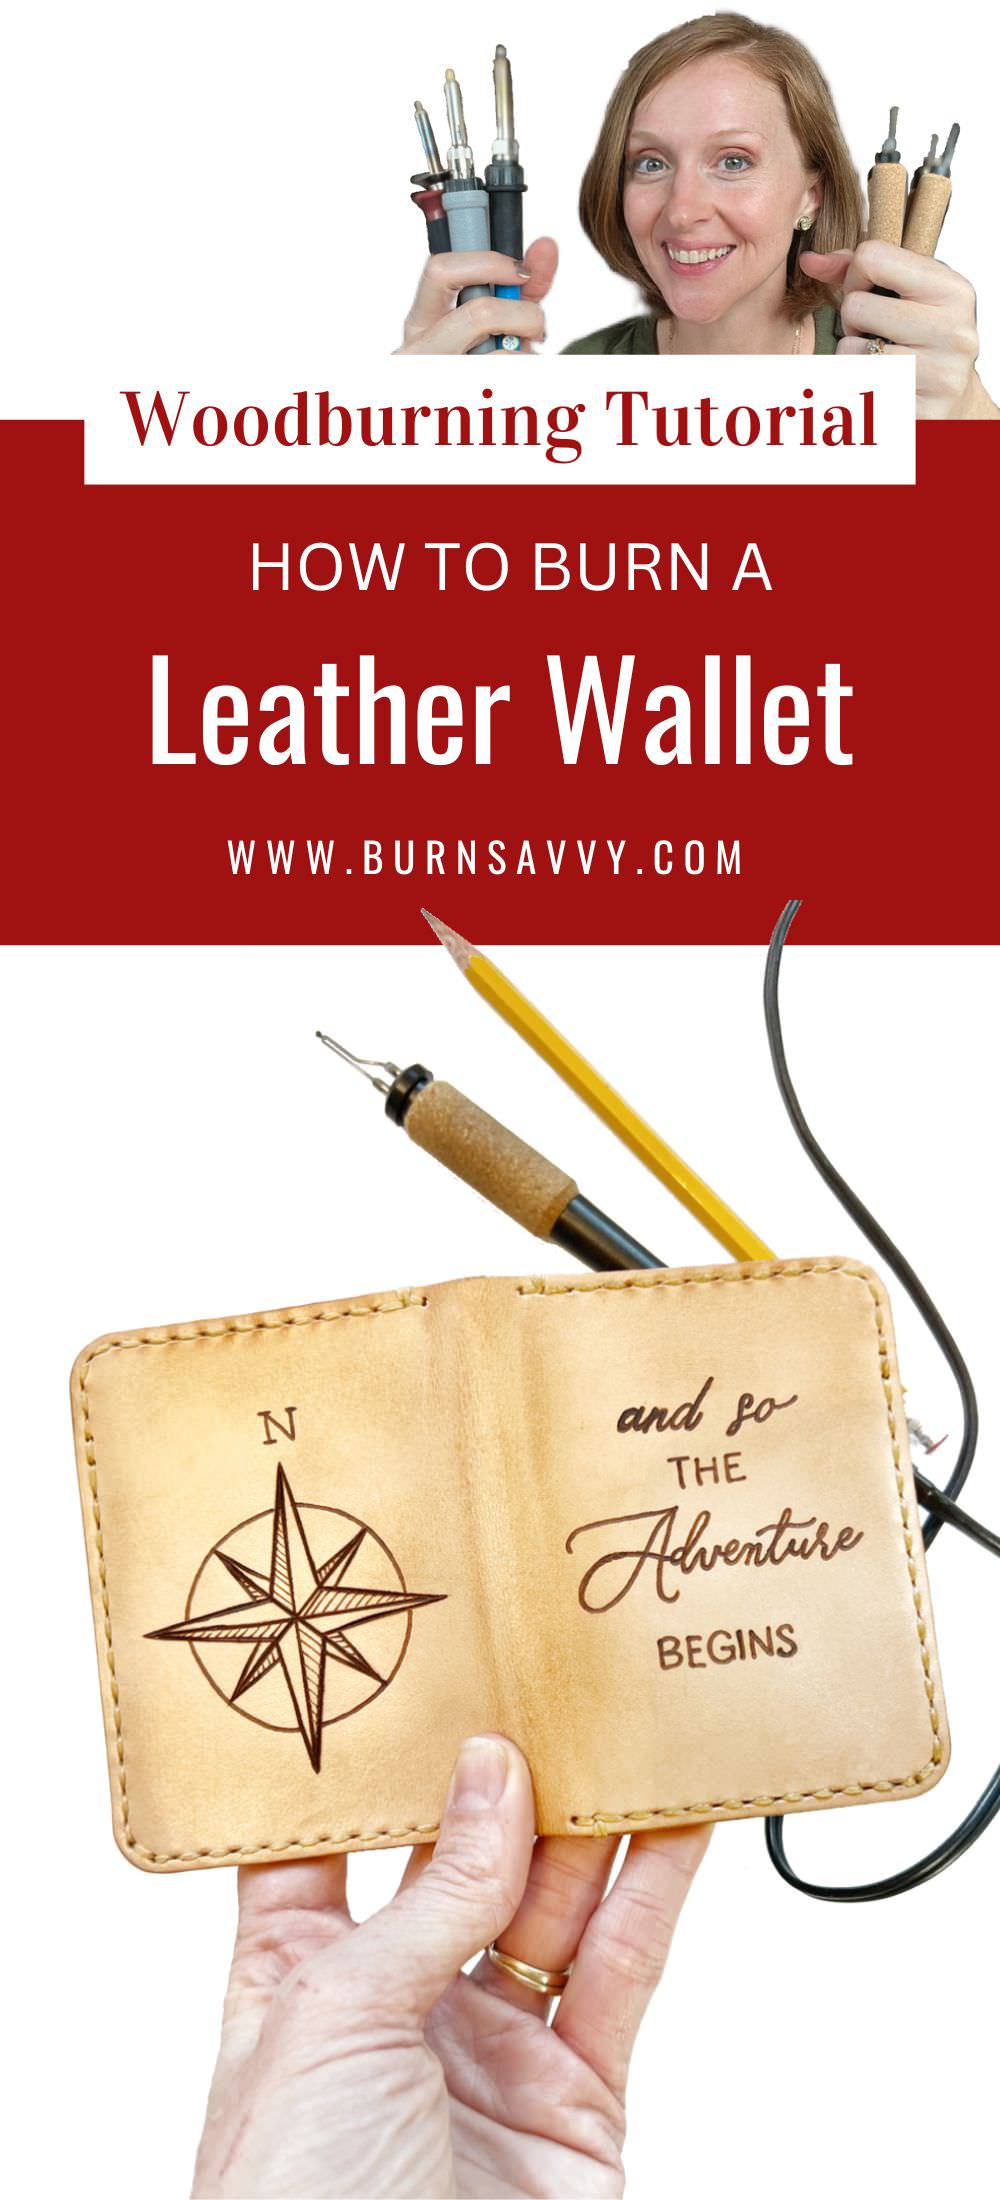 July Crate Club - Leather Wallet